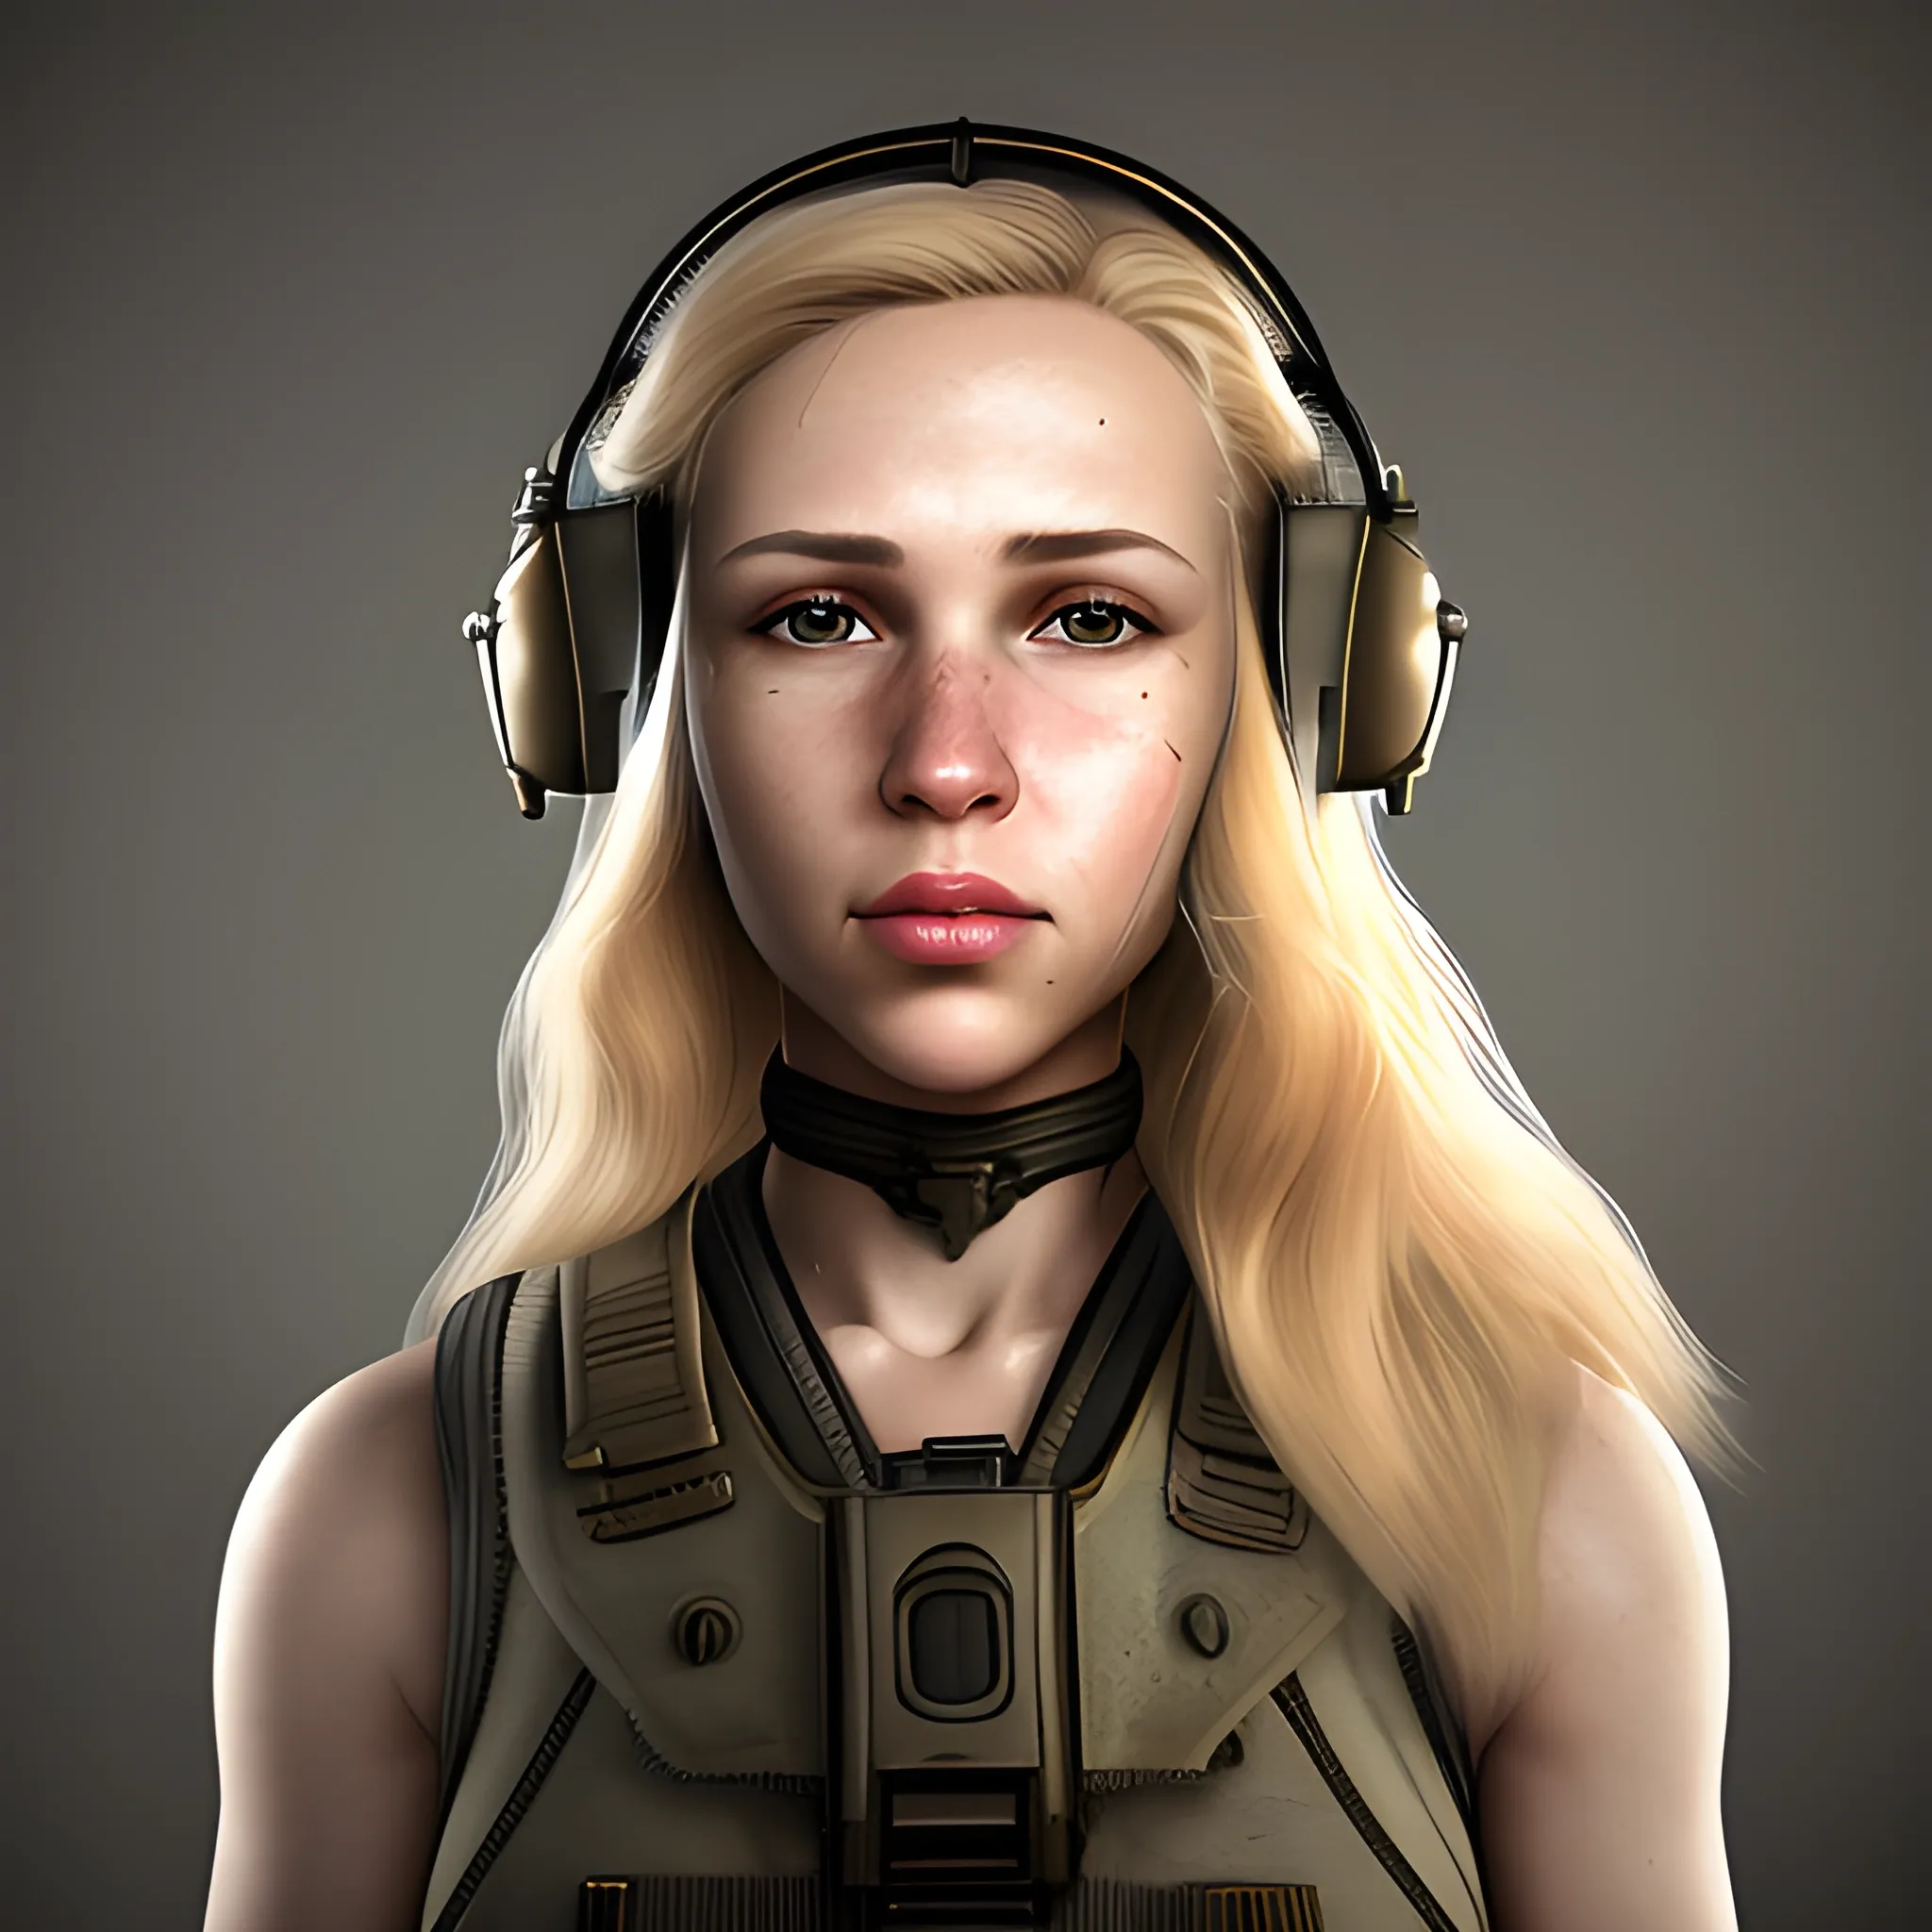 In the style of fallout 1, (masterpiece), (portrait photography), (portrait of a Caucasian female), no makeup, flat chested, white sports bra, dogtags, long hair, blond hair, brown eyes, full lips, round face, round nose, plump cheeks, black Bulletproof vest, F-35 Jet Fighter Helmet